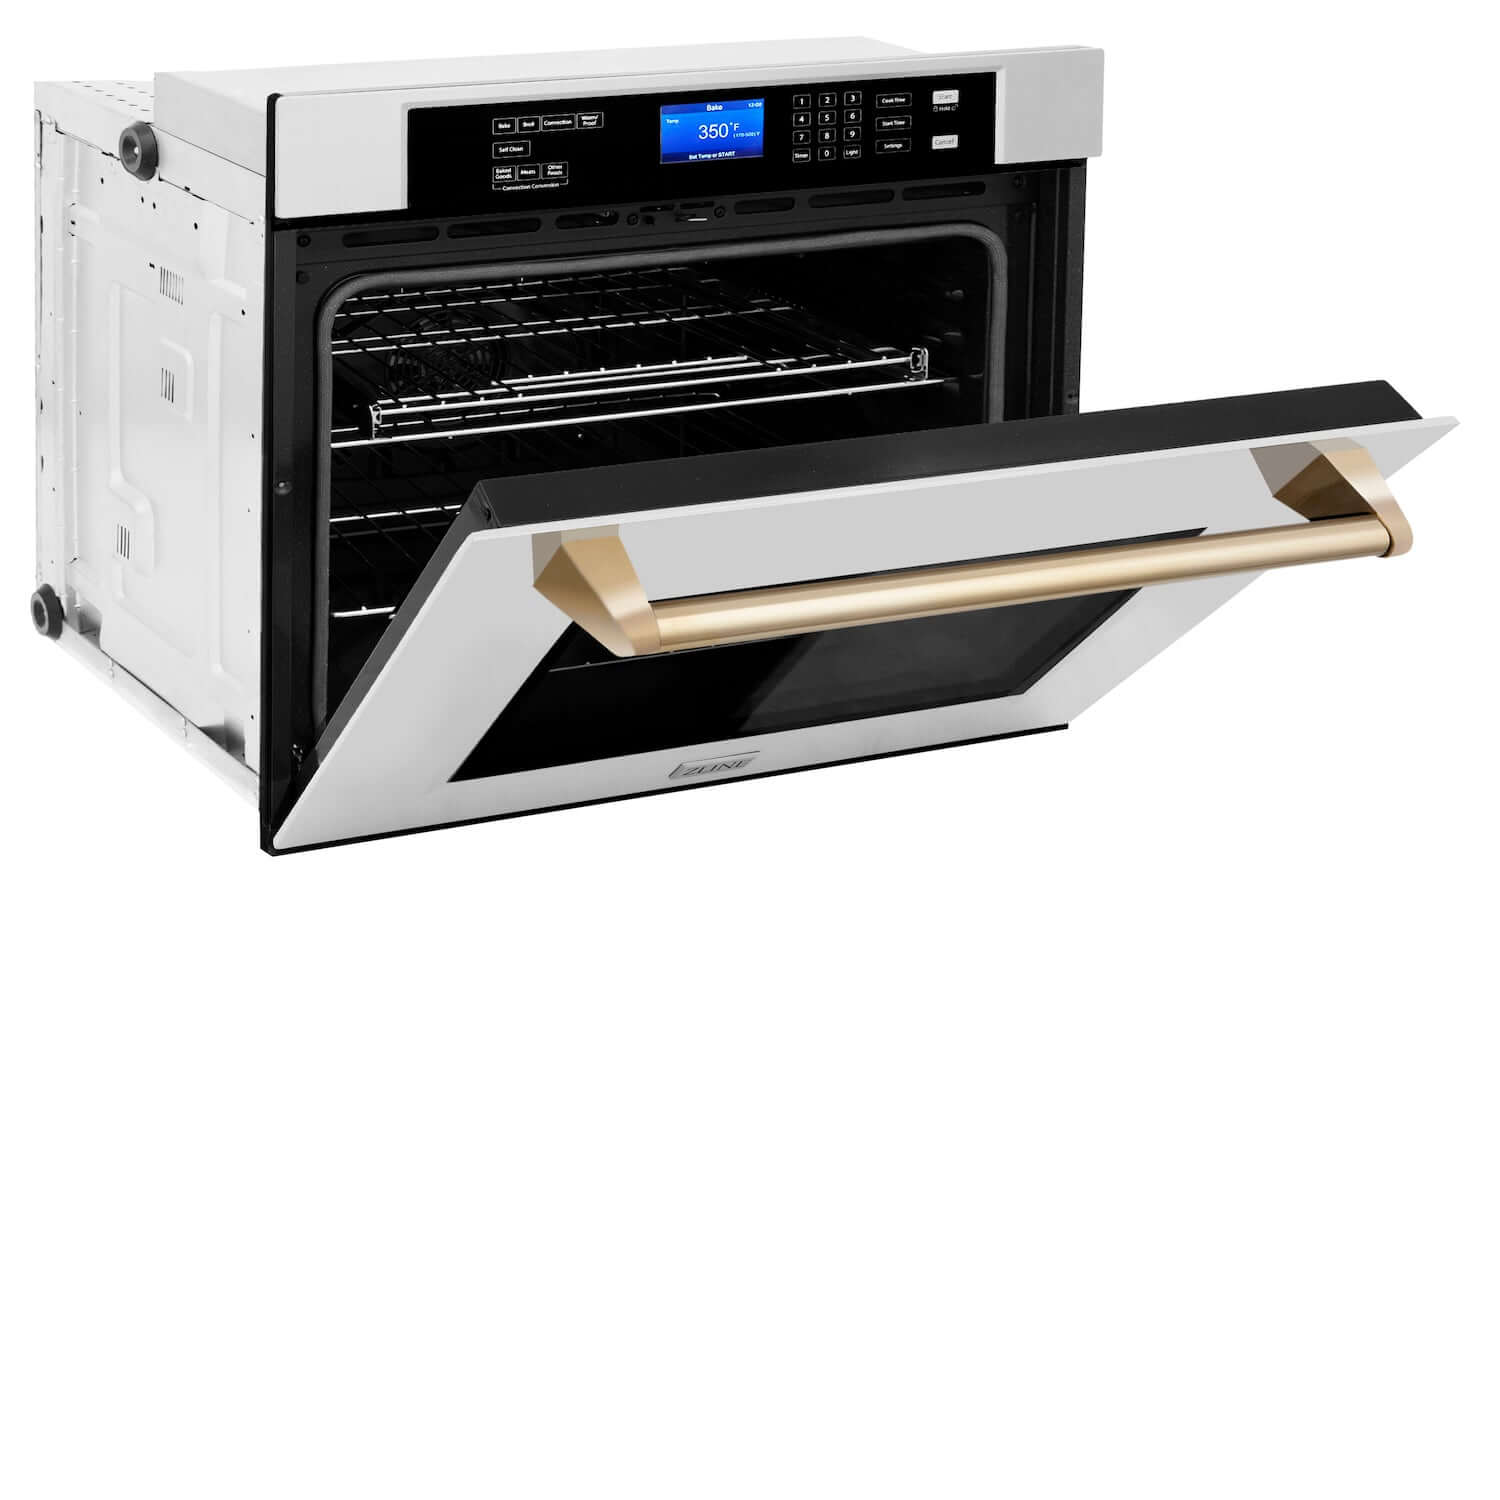 ZLINE Autograph Edition 30 in. Electric Single Wall Oven with Self Clean and True Convection in Stainless Steel and Polished Gold Accents (AWSZ-30-G) side, half open.